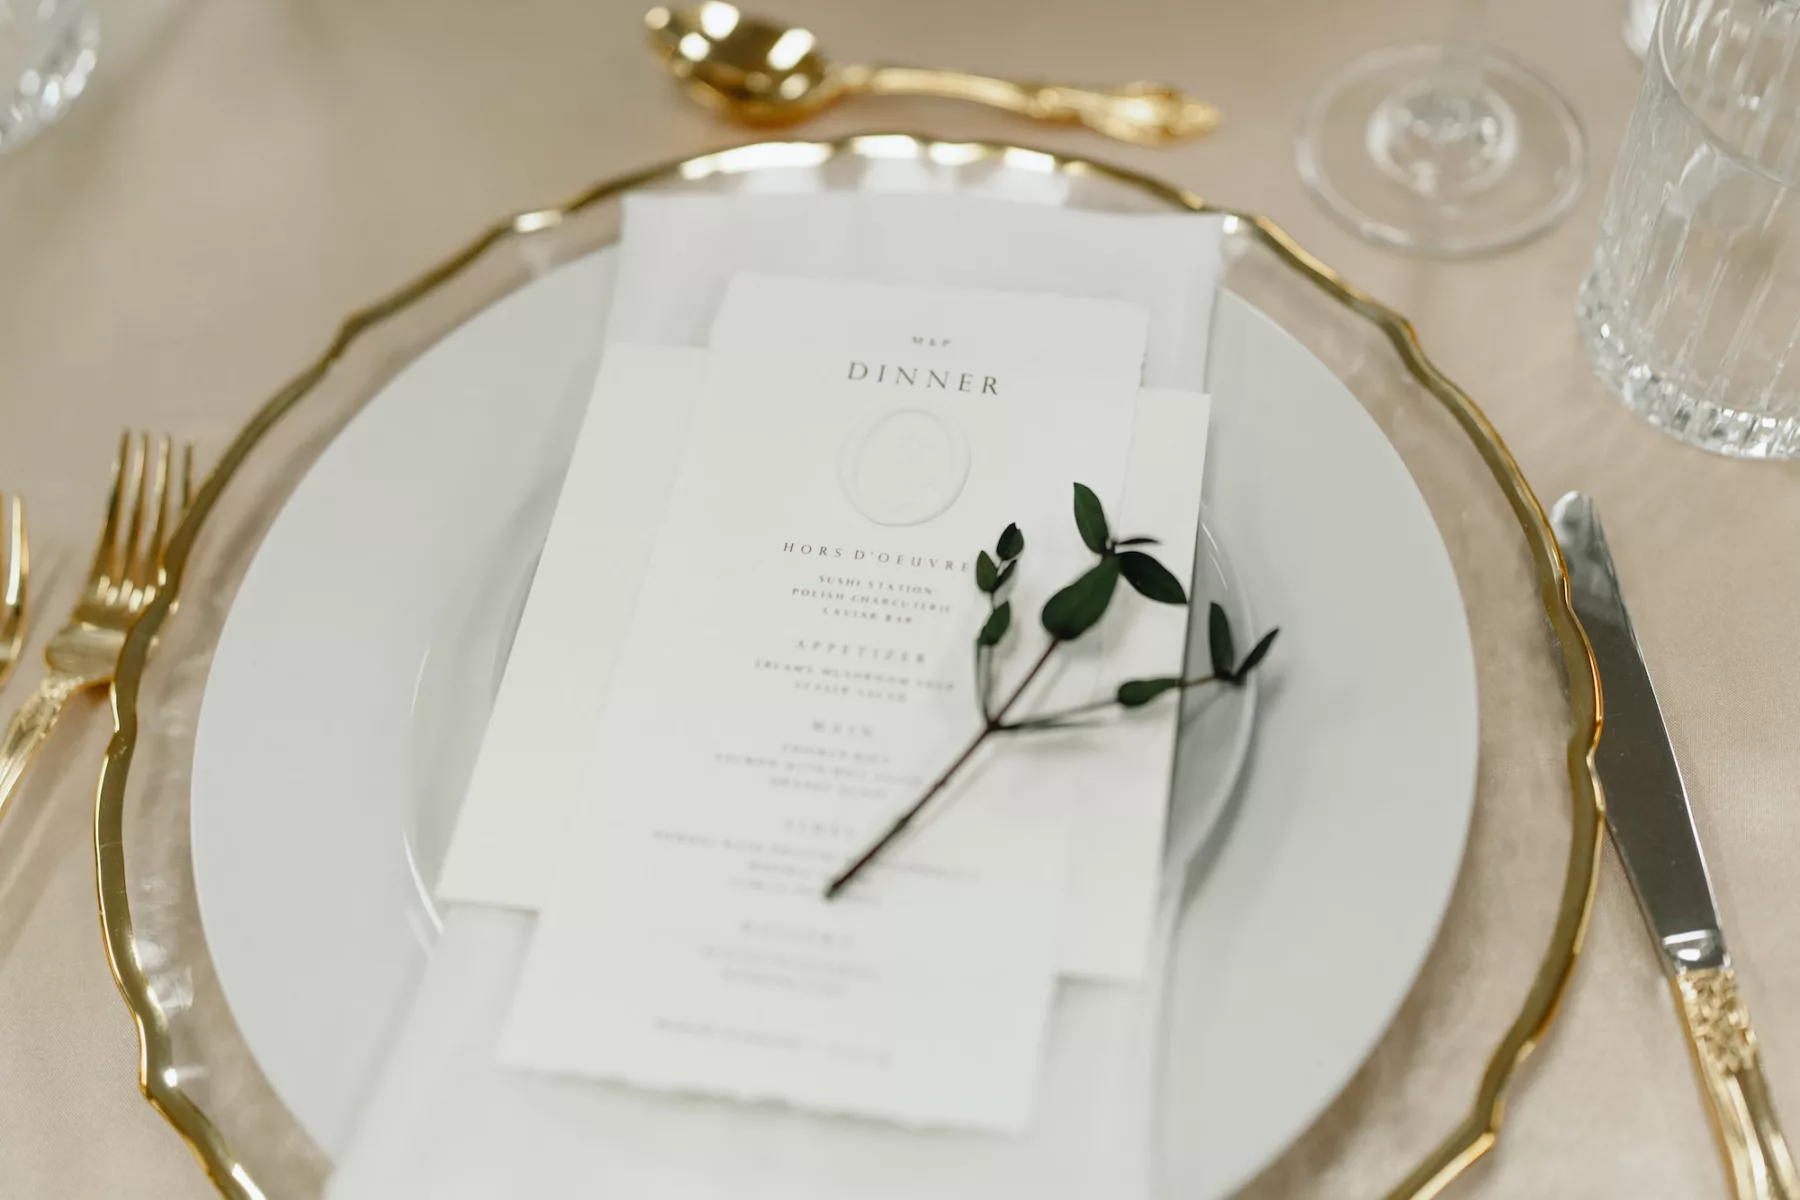 White and Gold Wedding Reception Menu Card and Greenery Sprig Ideas | Neutral Gold Place Setting Inspiration | Tampa Bay Kate Ryan Event Rentals